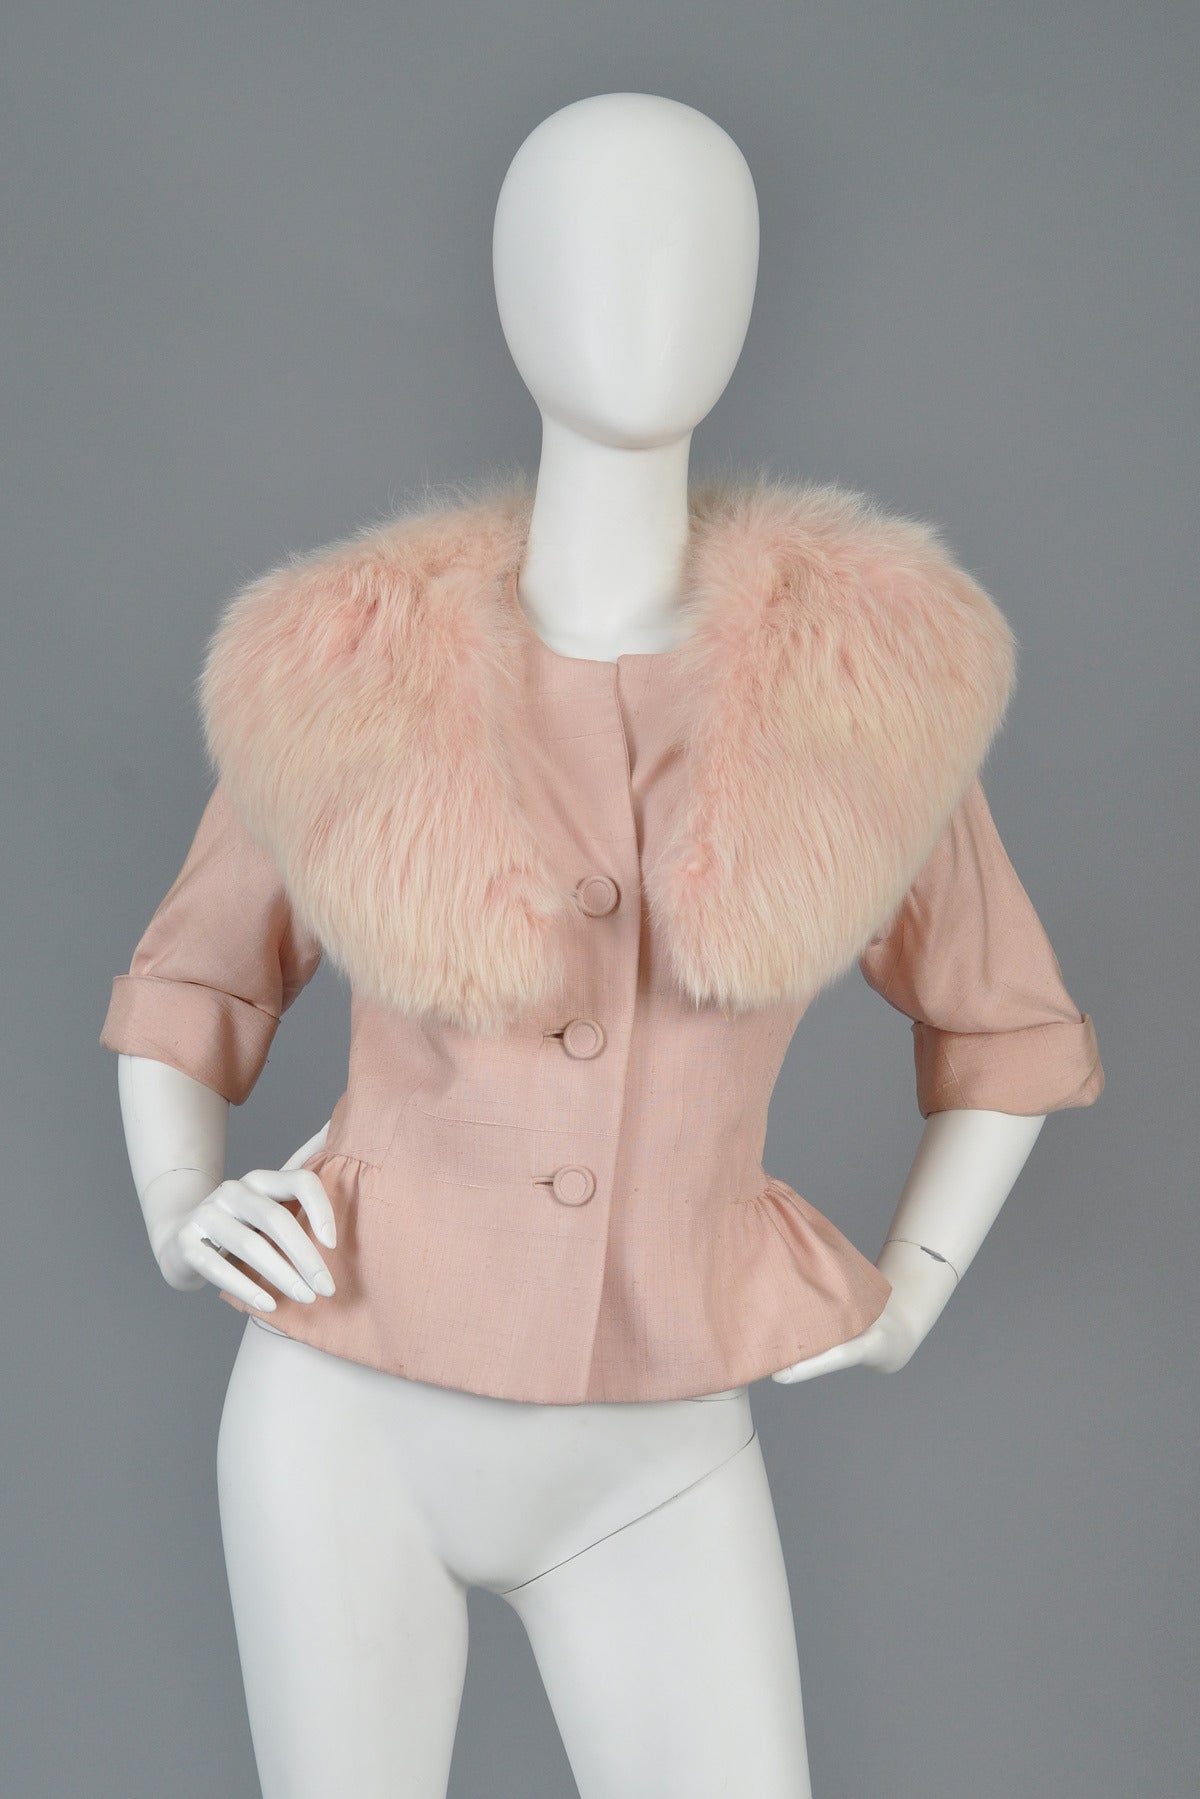 Lovely 1950s pink slubbed silk suit jacket. Absolutely stunning pale pink color with button front, nipped waist, gathered + ruched hips, 3/4 length sleeves and MASSIVE genuine pink fox fur collar. Best fits sizes small-medium. Excellent vintage